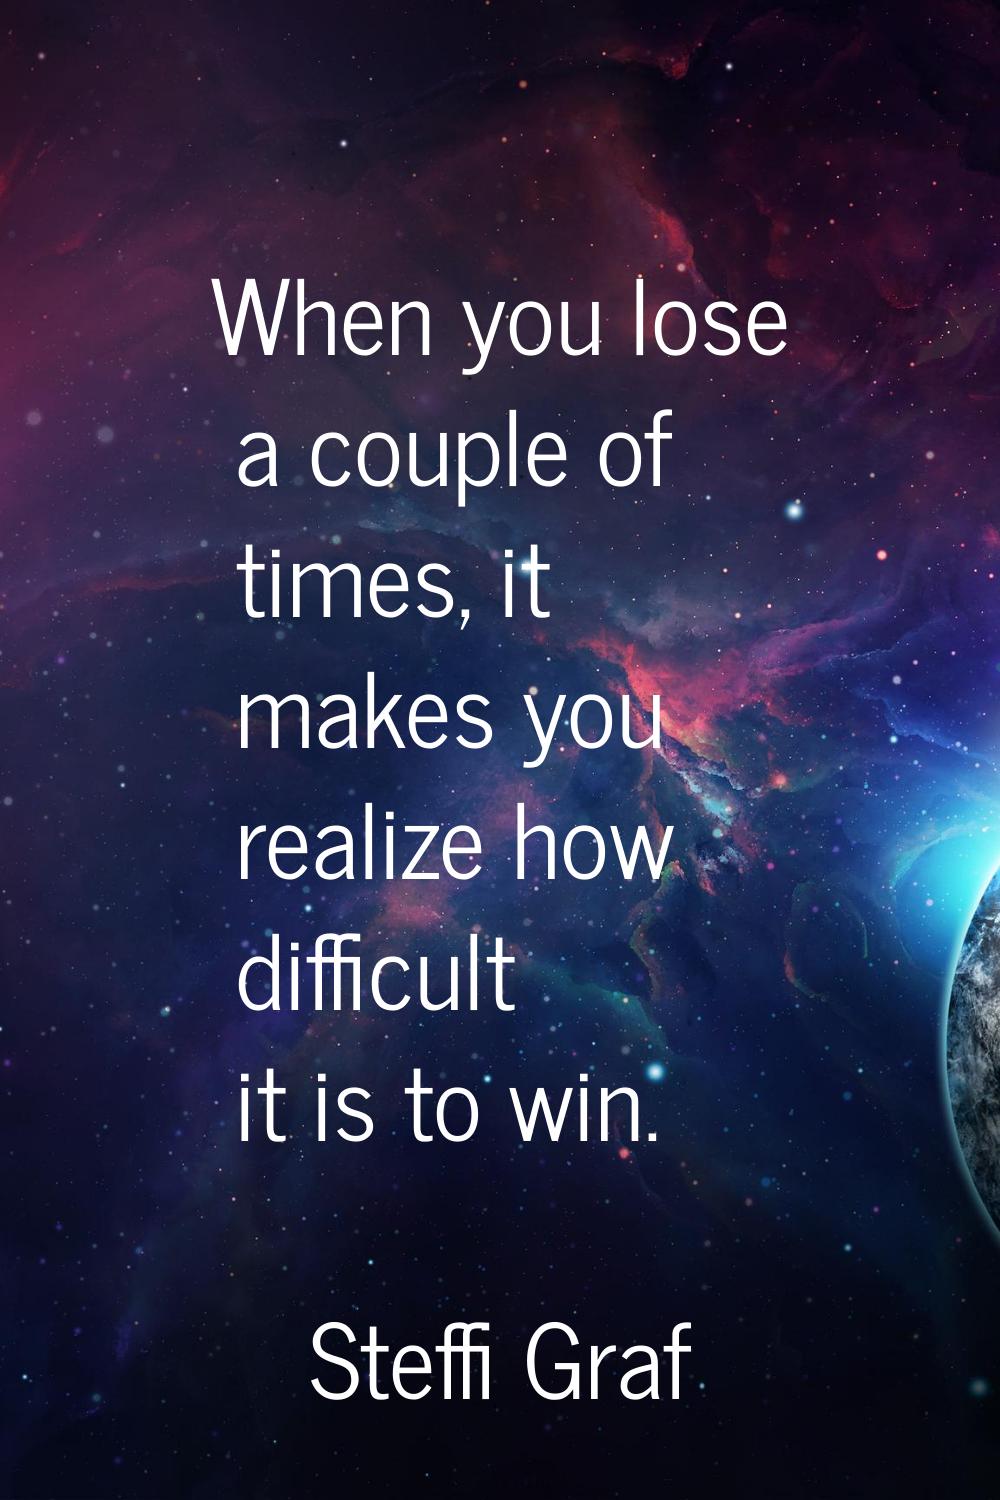 When you lose a couple of times, it makes you realize how difficult it is to win.